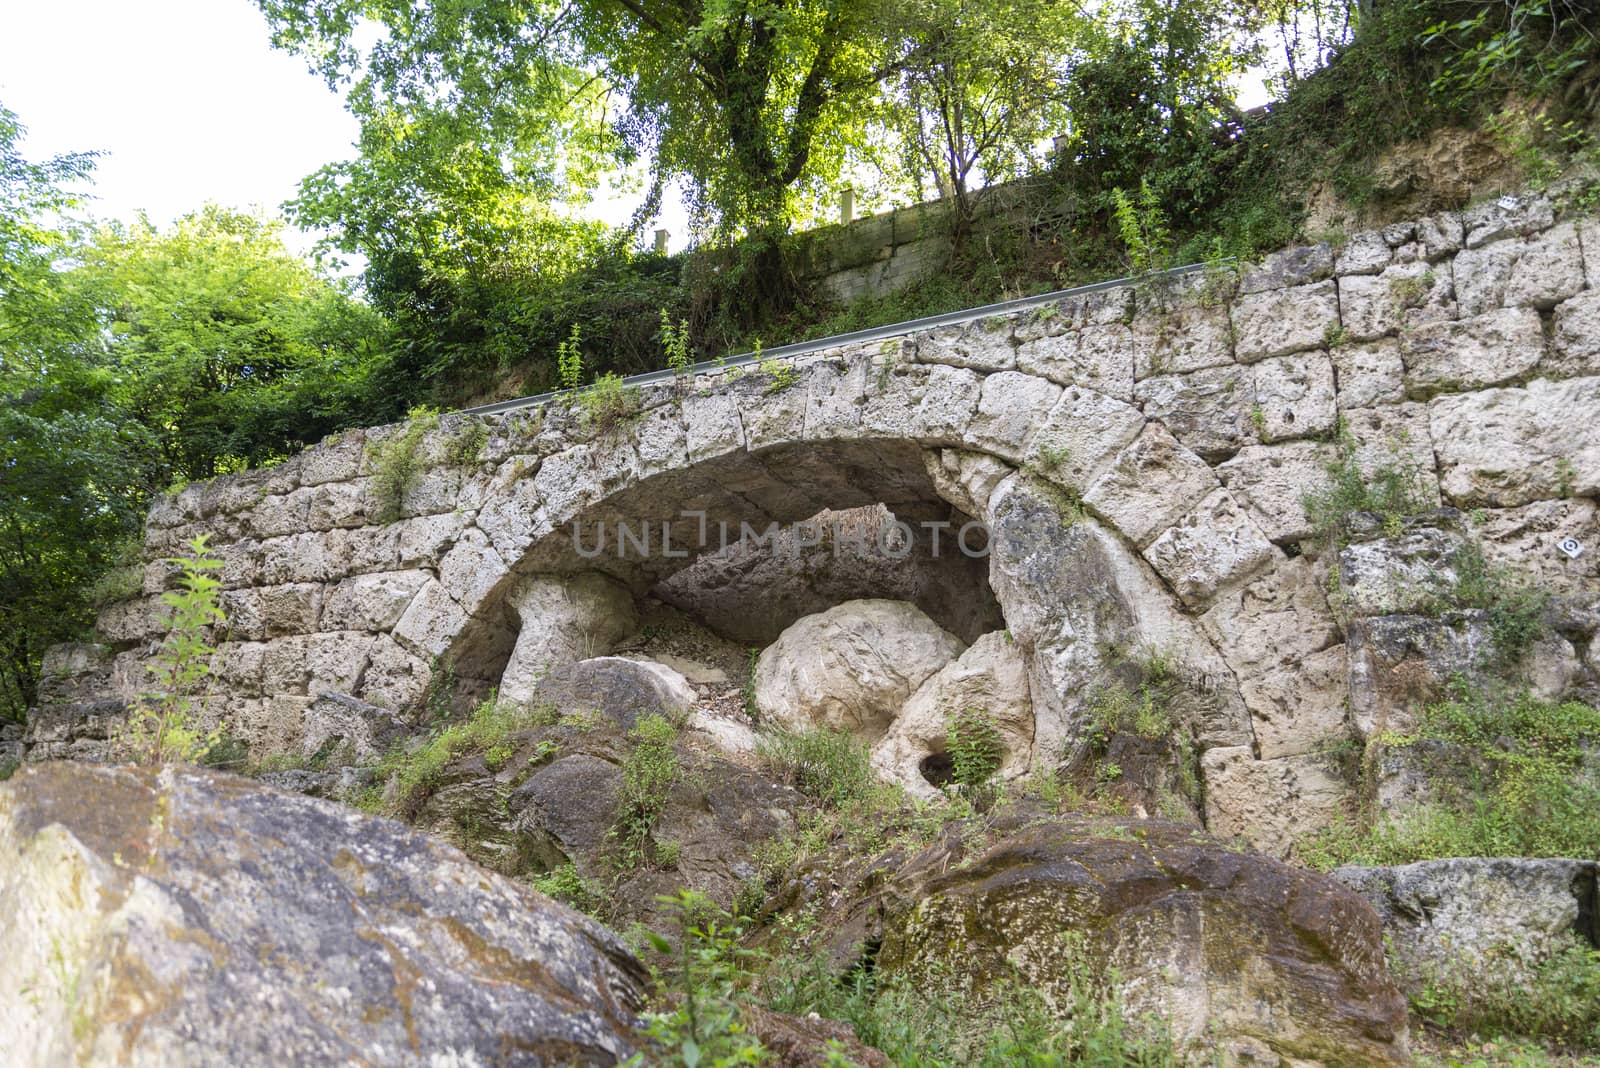 archaeological bridge found in the Valnerina along the black river